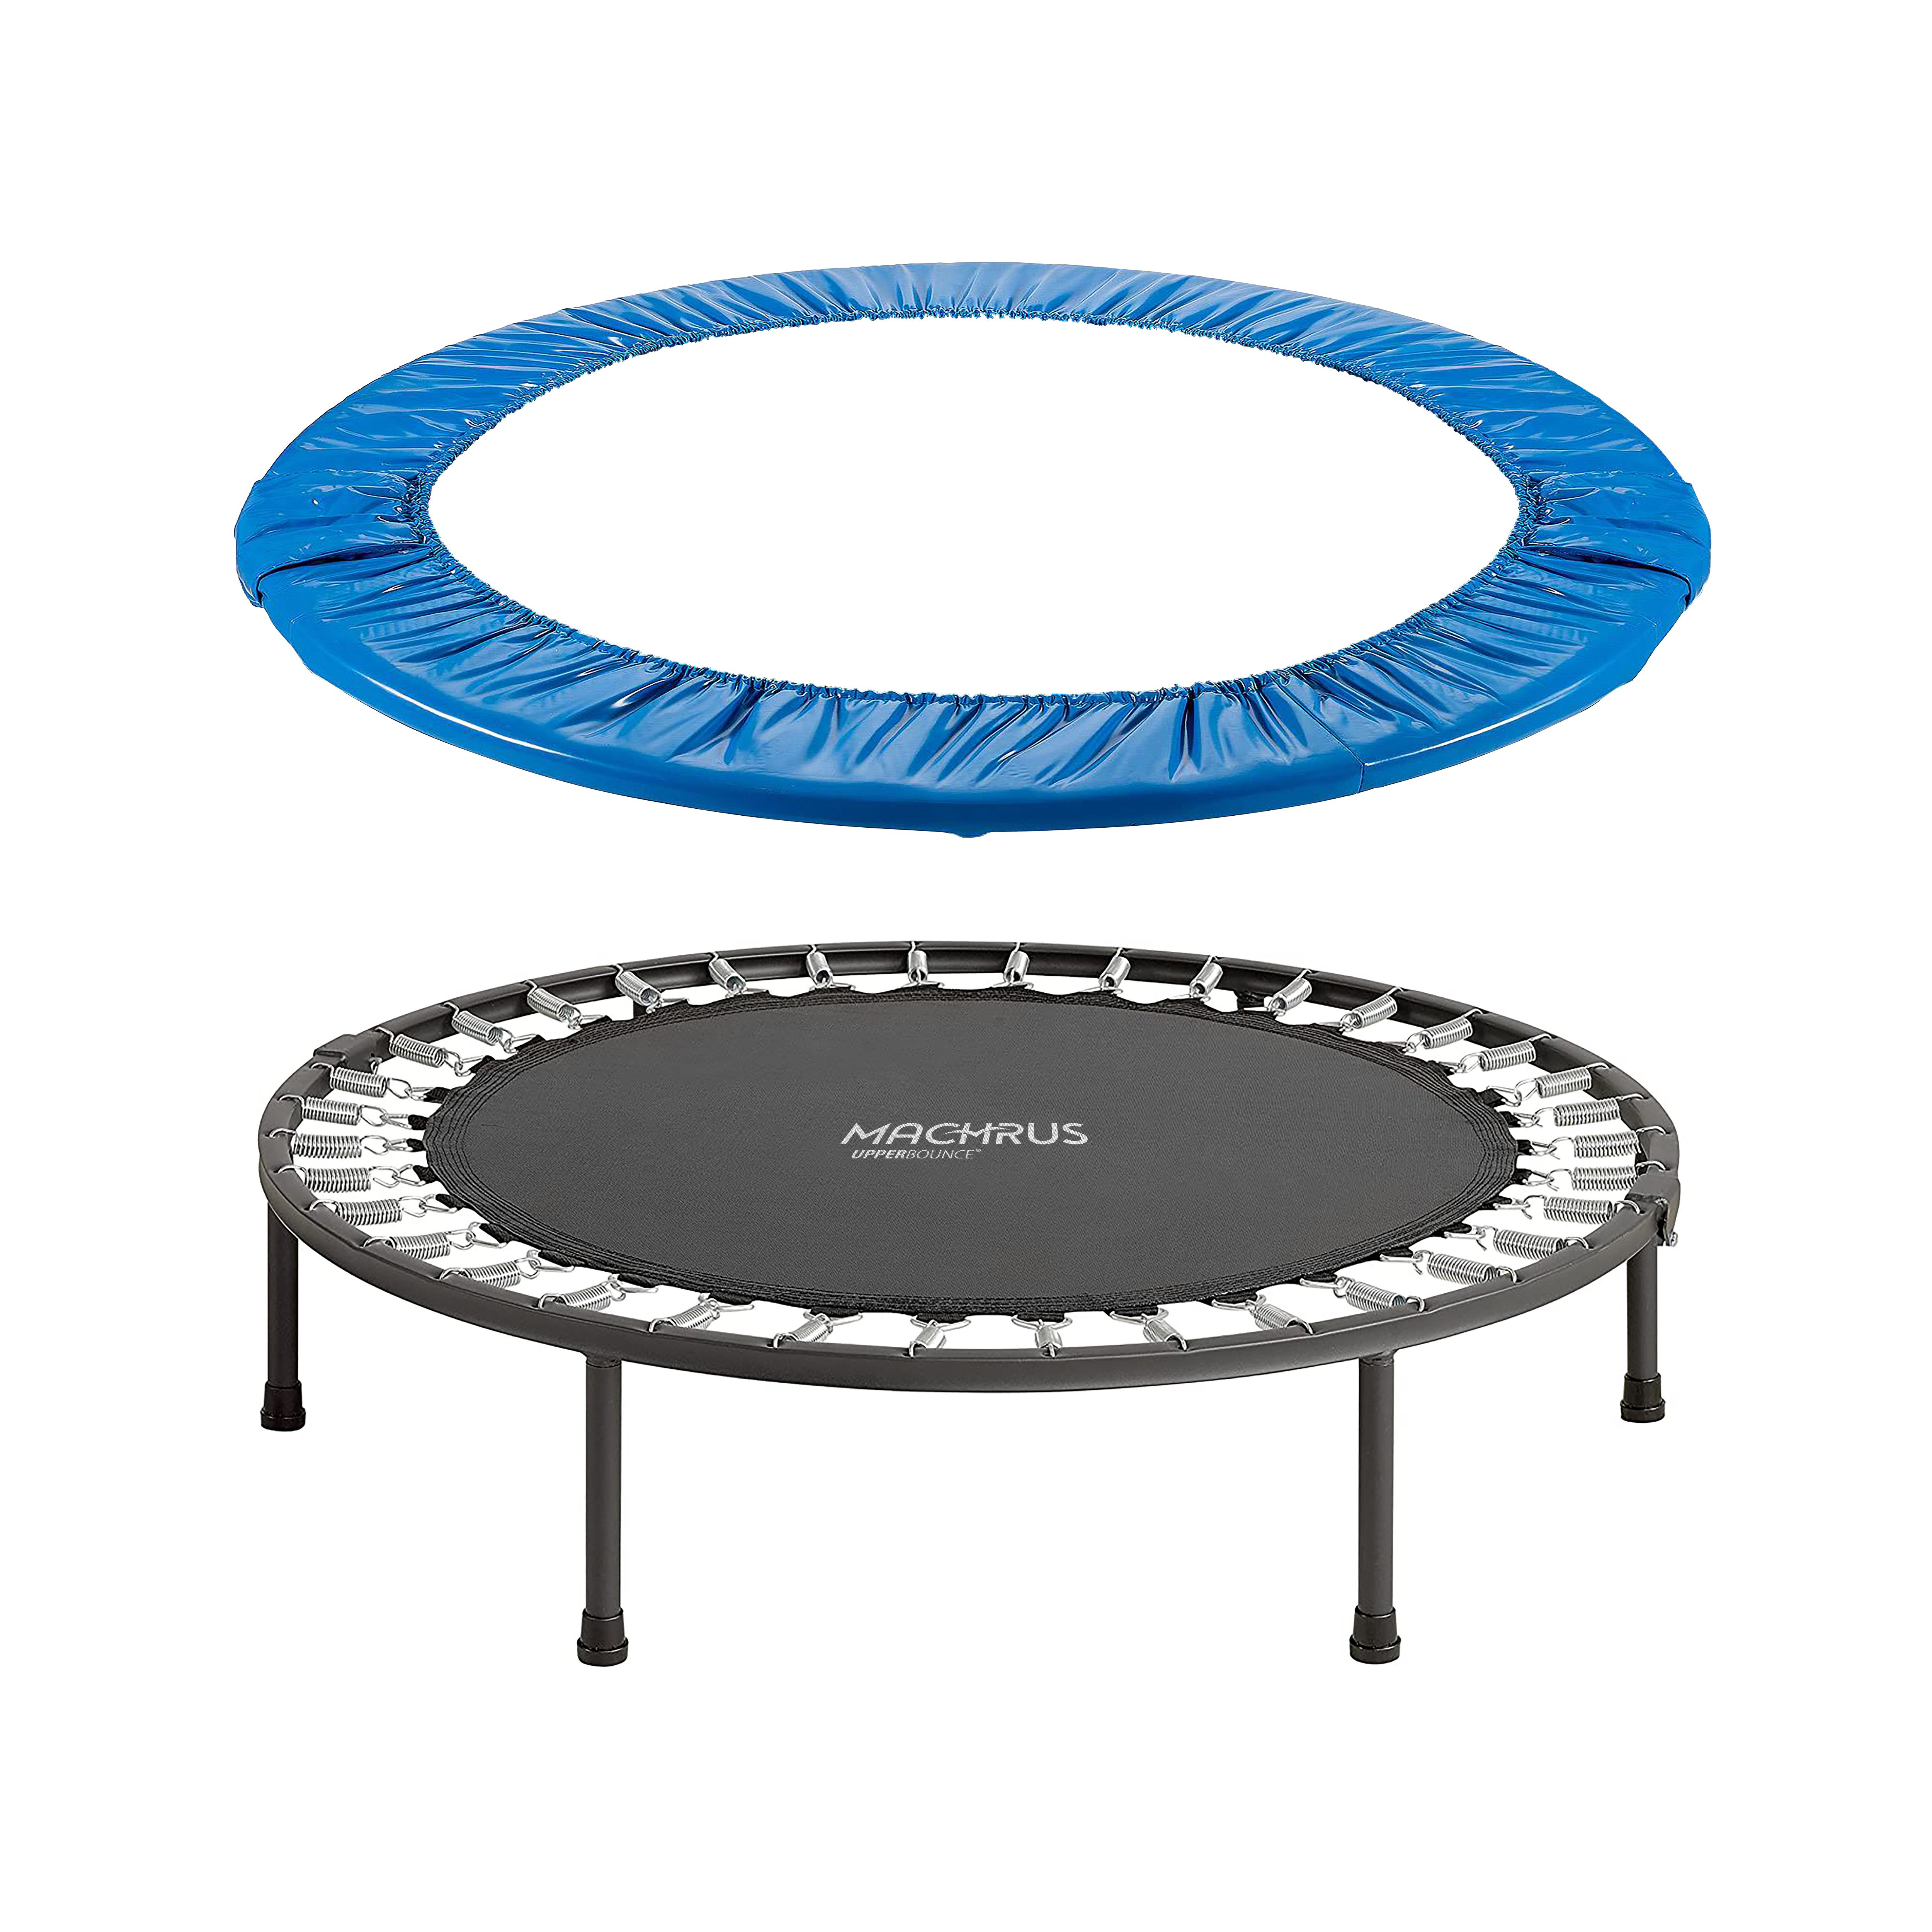 Upper Bounce Machrus Trampoline Super Spring Cover - 12 ft. Safety